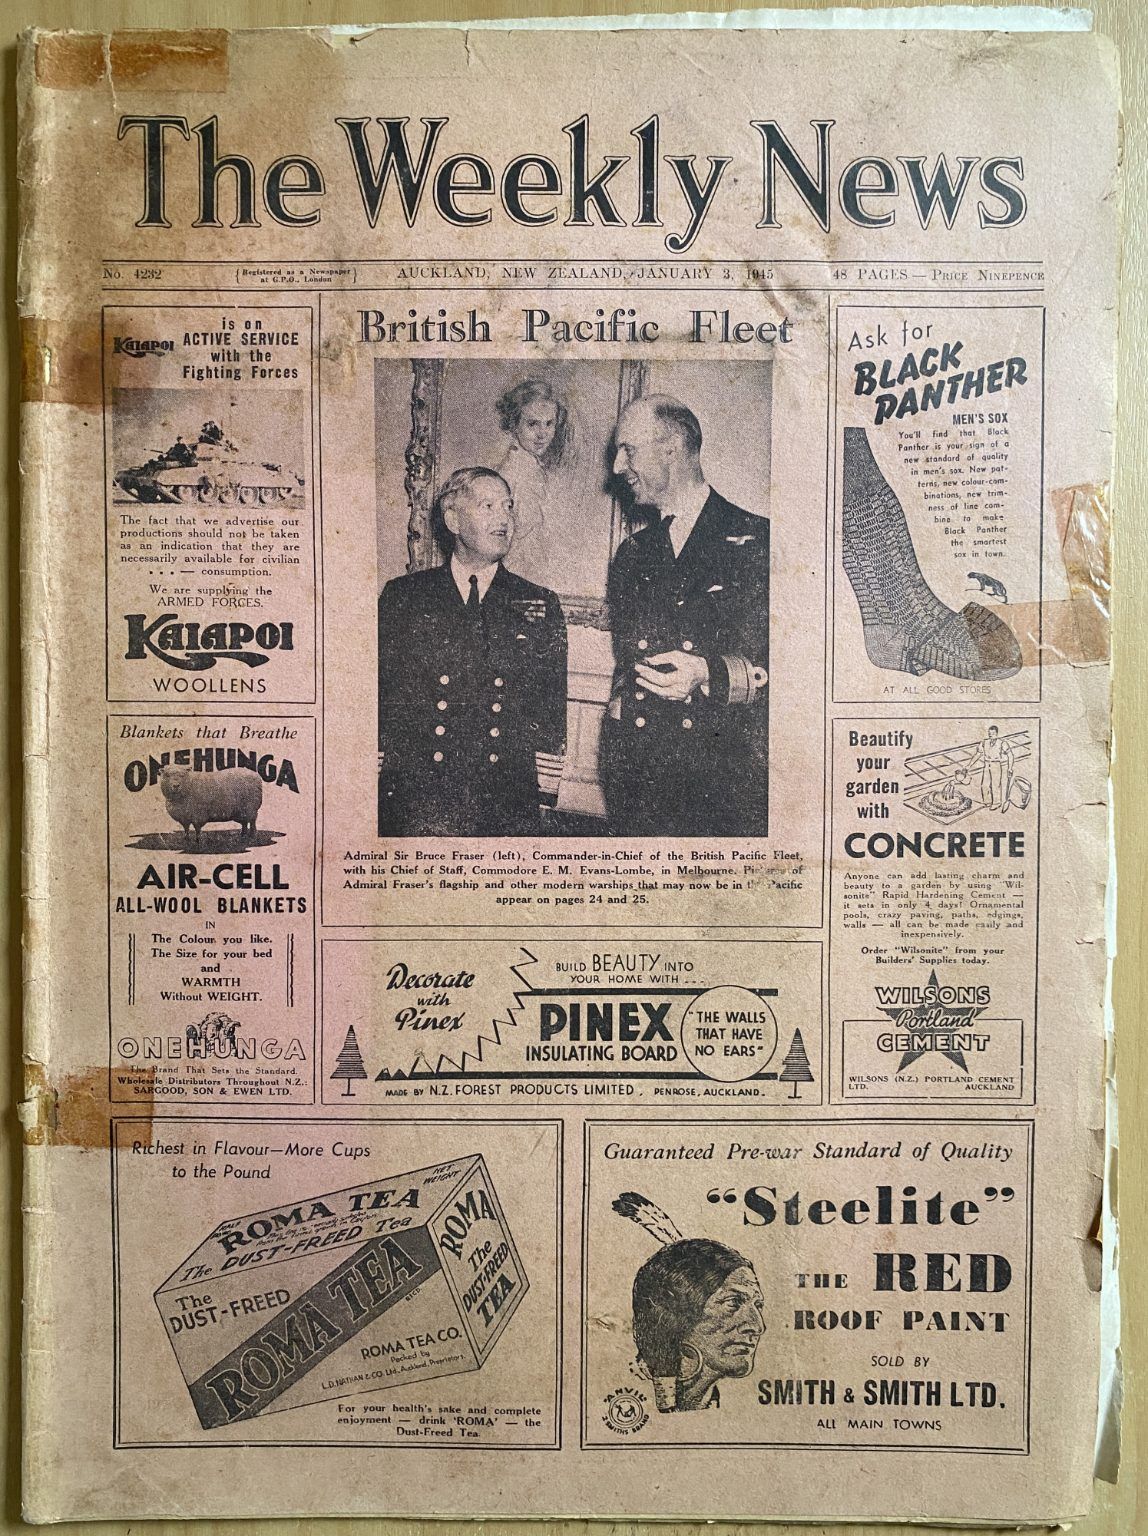 OLD NEWSPAPER: The Weekly News - No. 4232, 3 January 1945